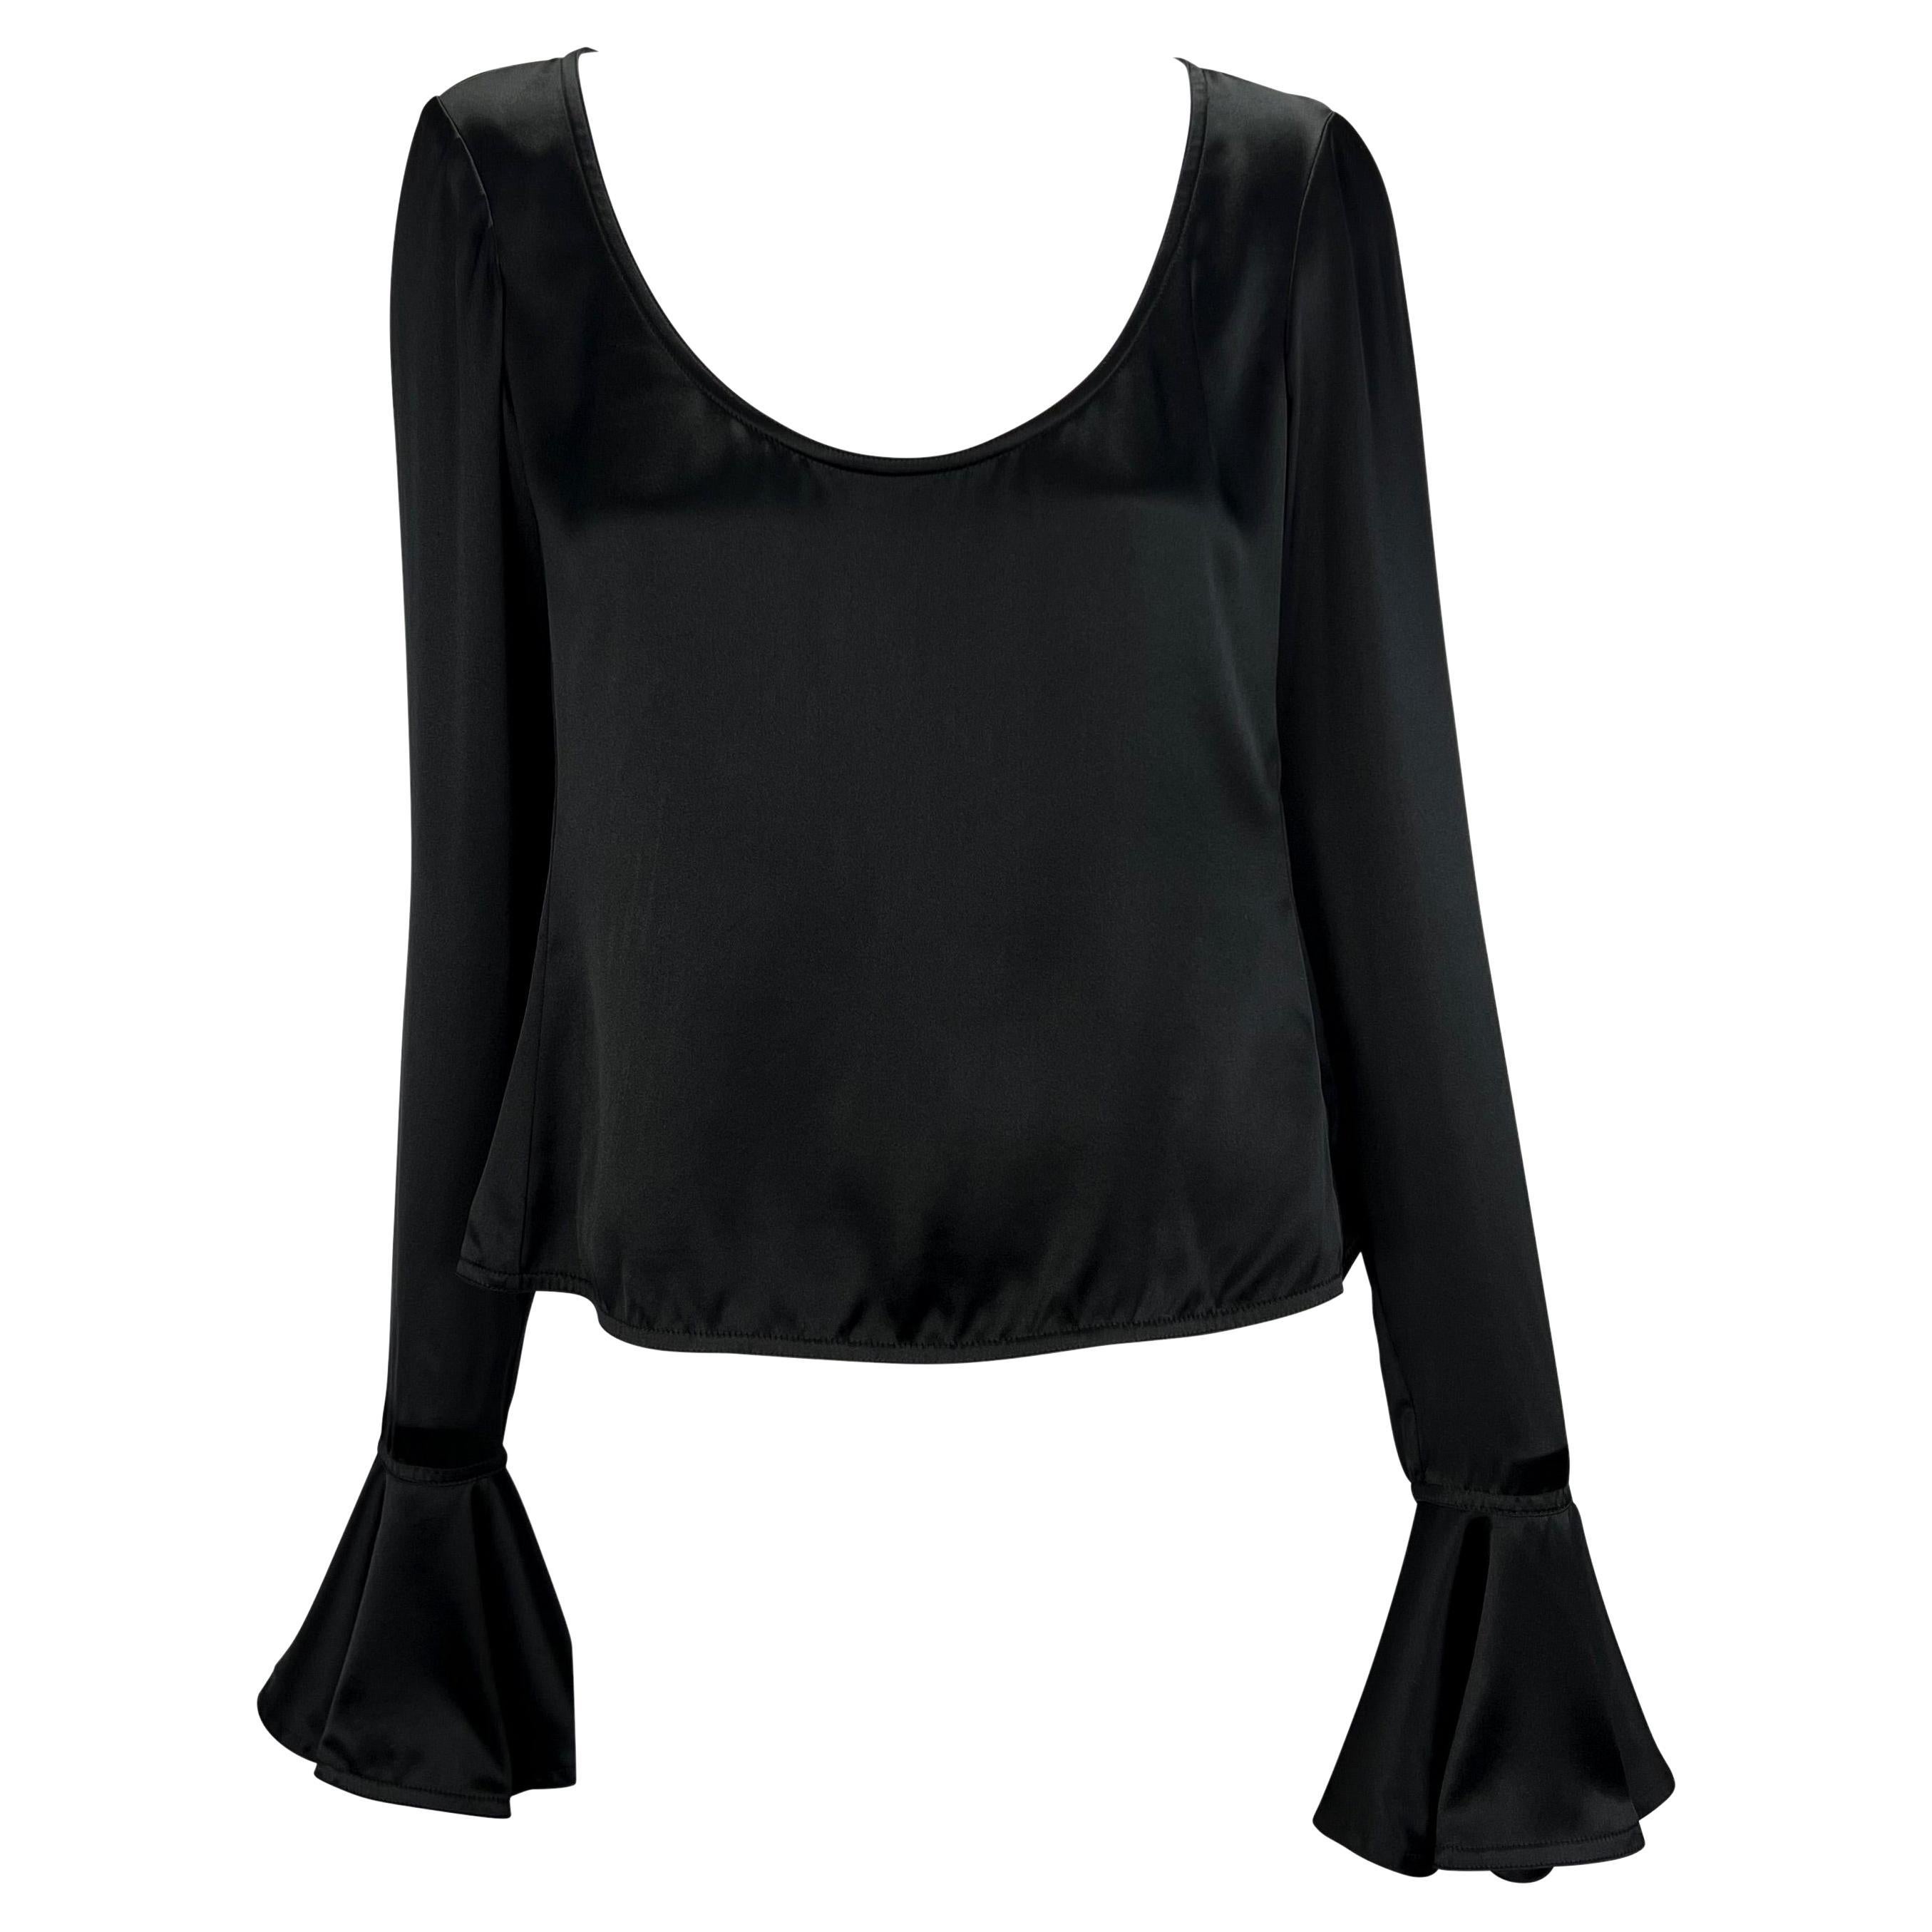 F/W 2003 Yves Saint Laurent by Tom Ford Black Silk Satin Bell Cuff Scoop Top For Sale